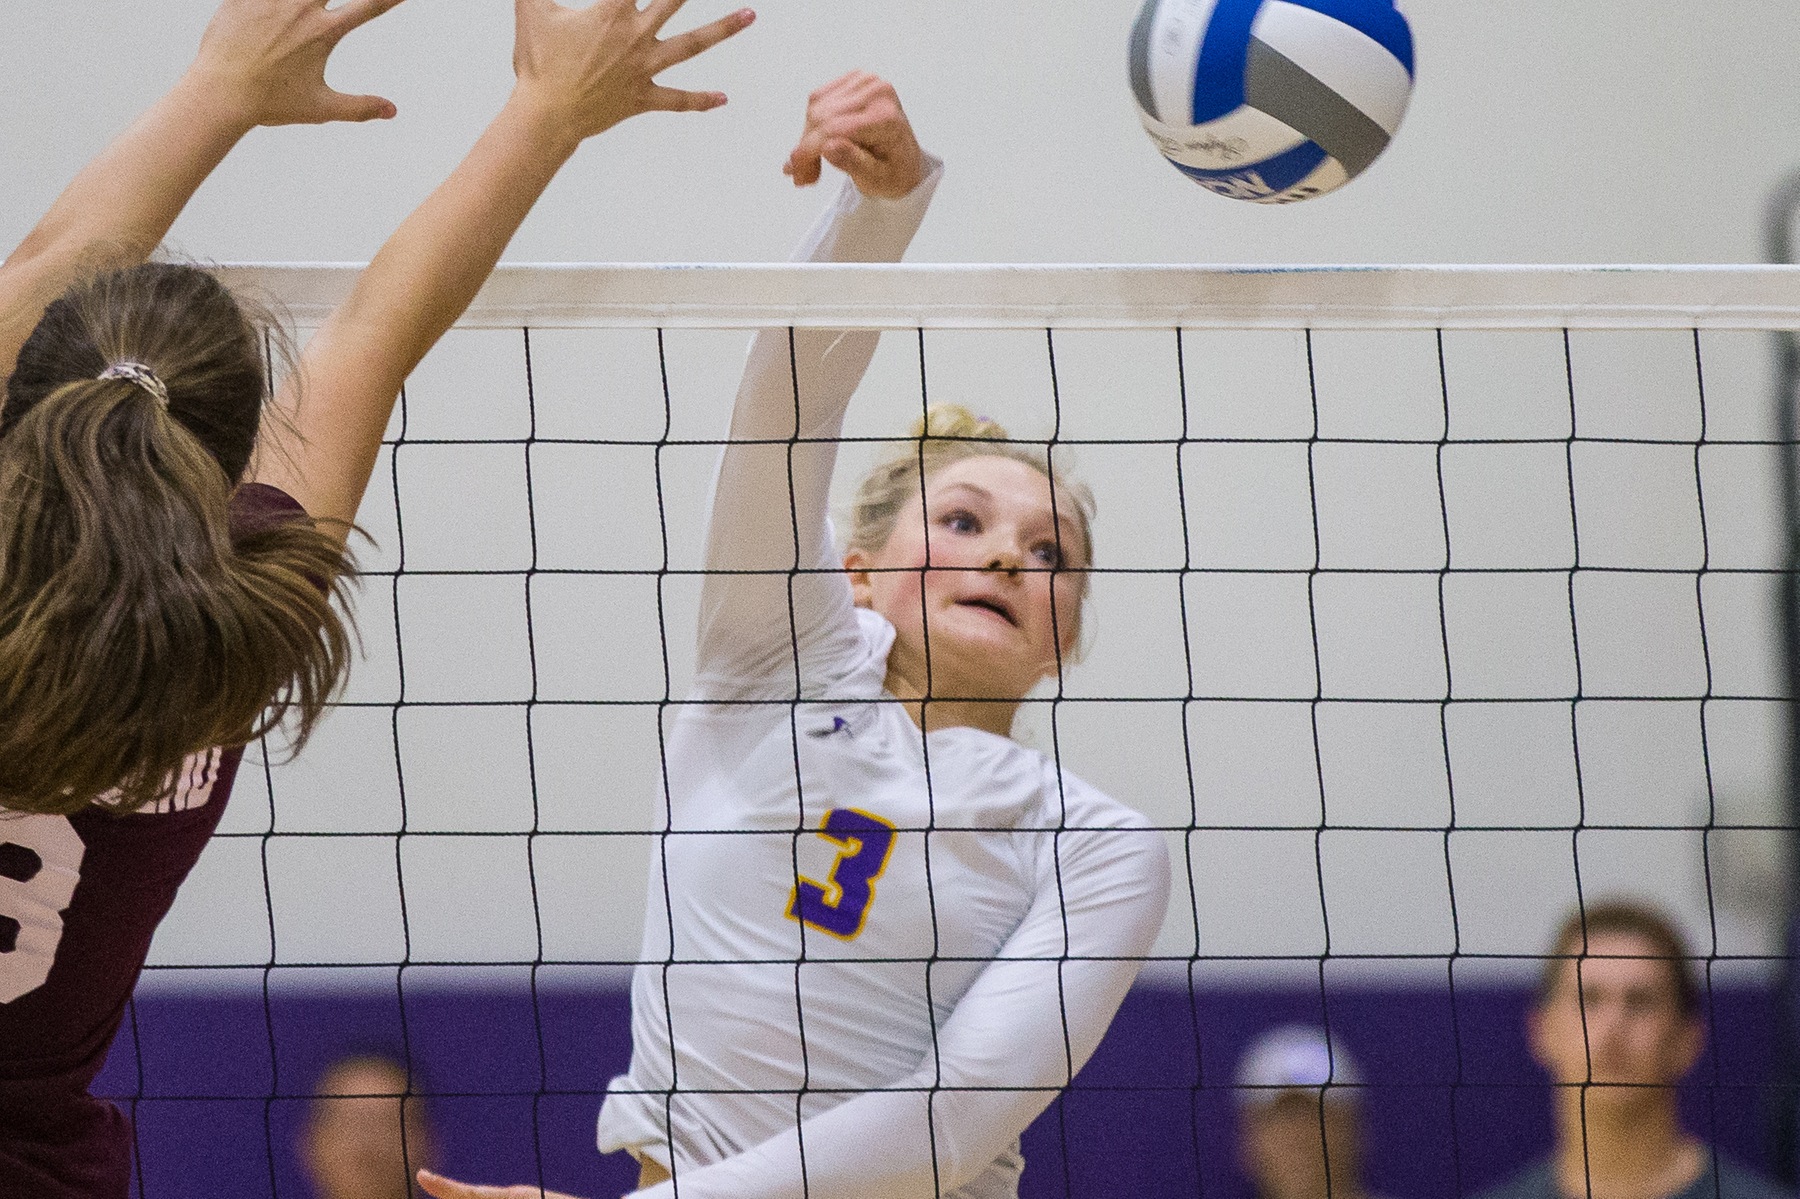 Maci Haddad swatted down a team-high eight kills as the Regals tested No. 11 Trinity (Texas).